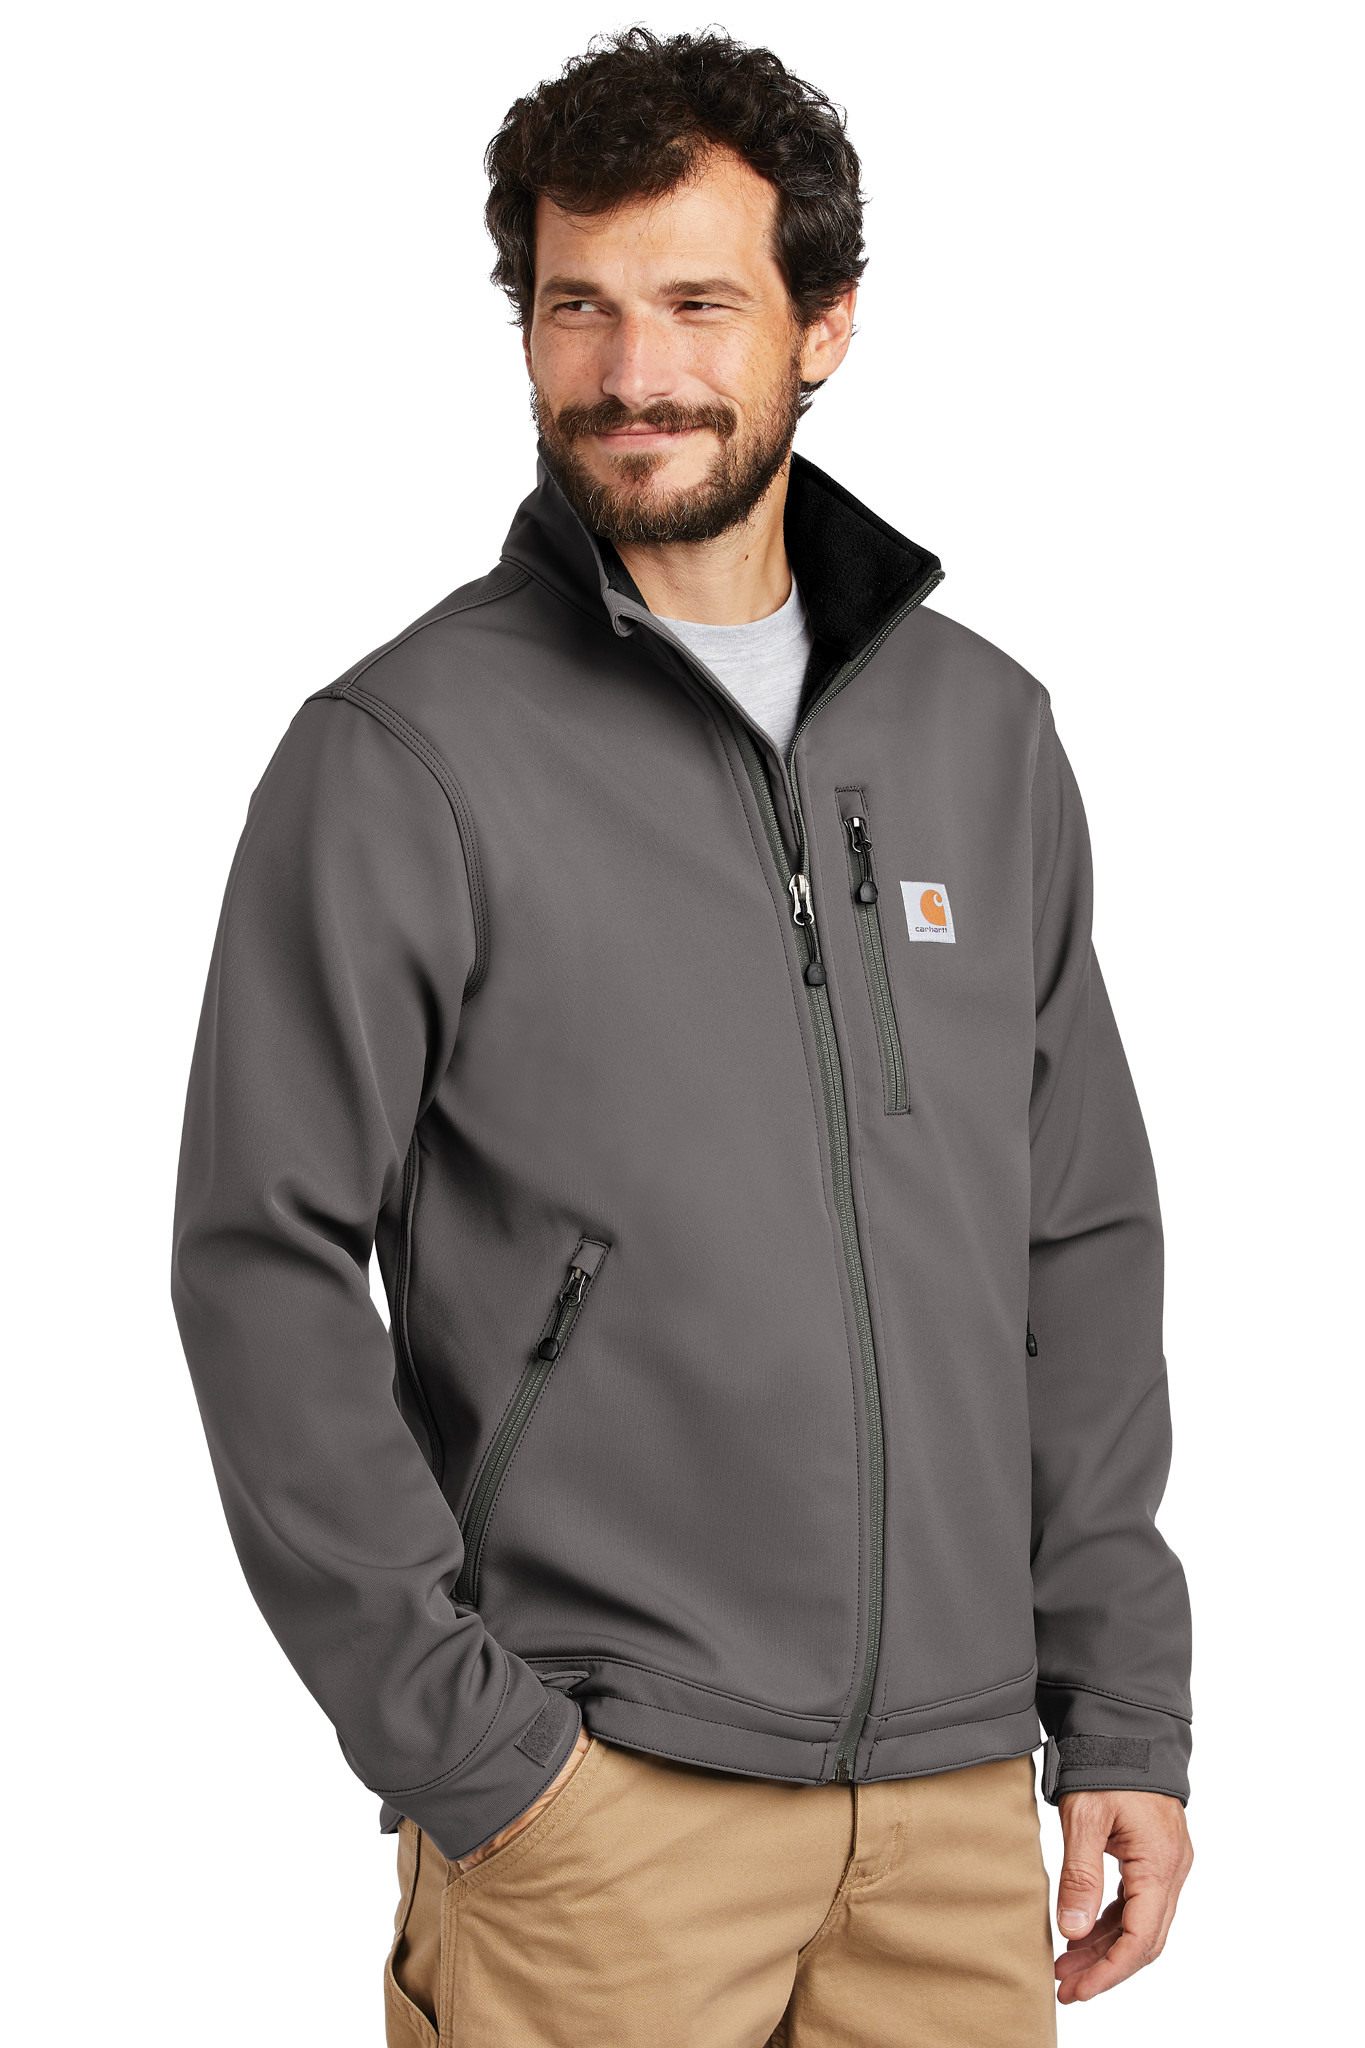 Carhartt ® Crowley Soft Shell Jacket coming spring 2019Trophy Trolley